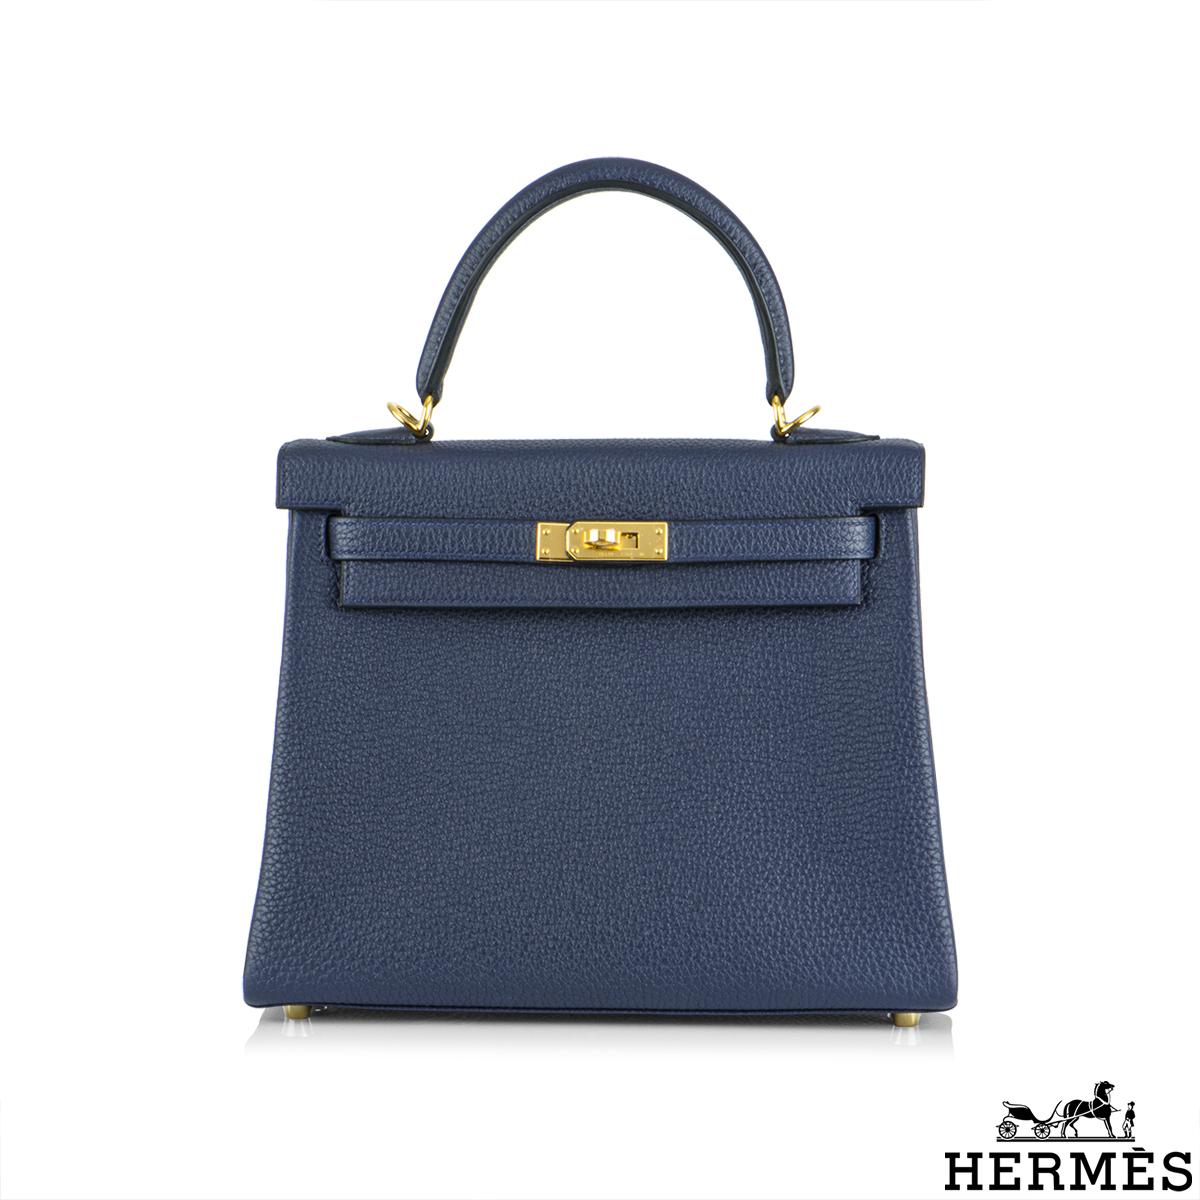 An exquisite Hermès Kelly II Retourne 25cm Blue Nuit Handbag. The rich navy blue colour is complemented with gold hardware. The exterior of this Kelly features a Retourne style in blue nuit togo leather. It has a front toggle closure, a single